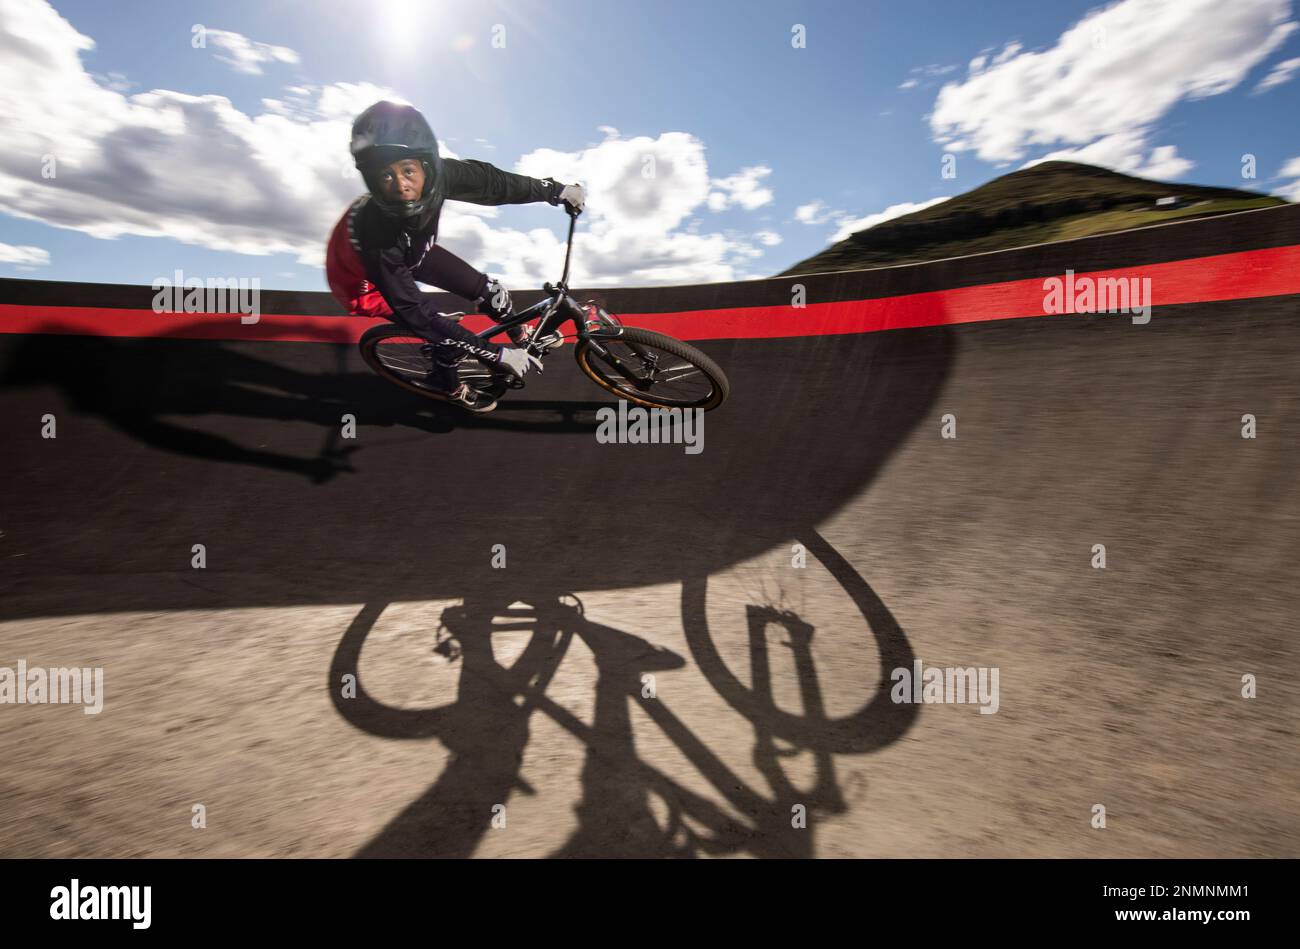 Growing up in Lesotho, Khothalang Leuta just wanted to be faster than the  boys, so she taught herself how to ride a BMX bike. As Leuta doesn't own a  bike, she has